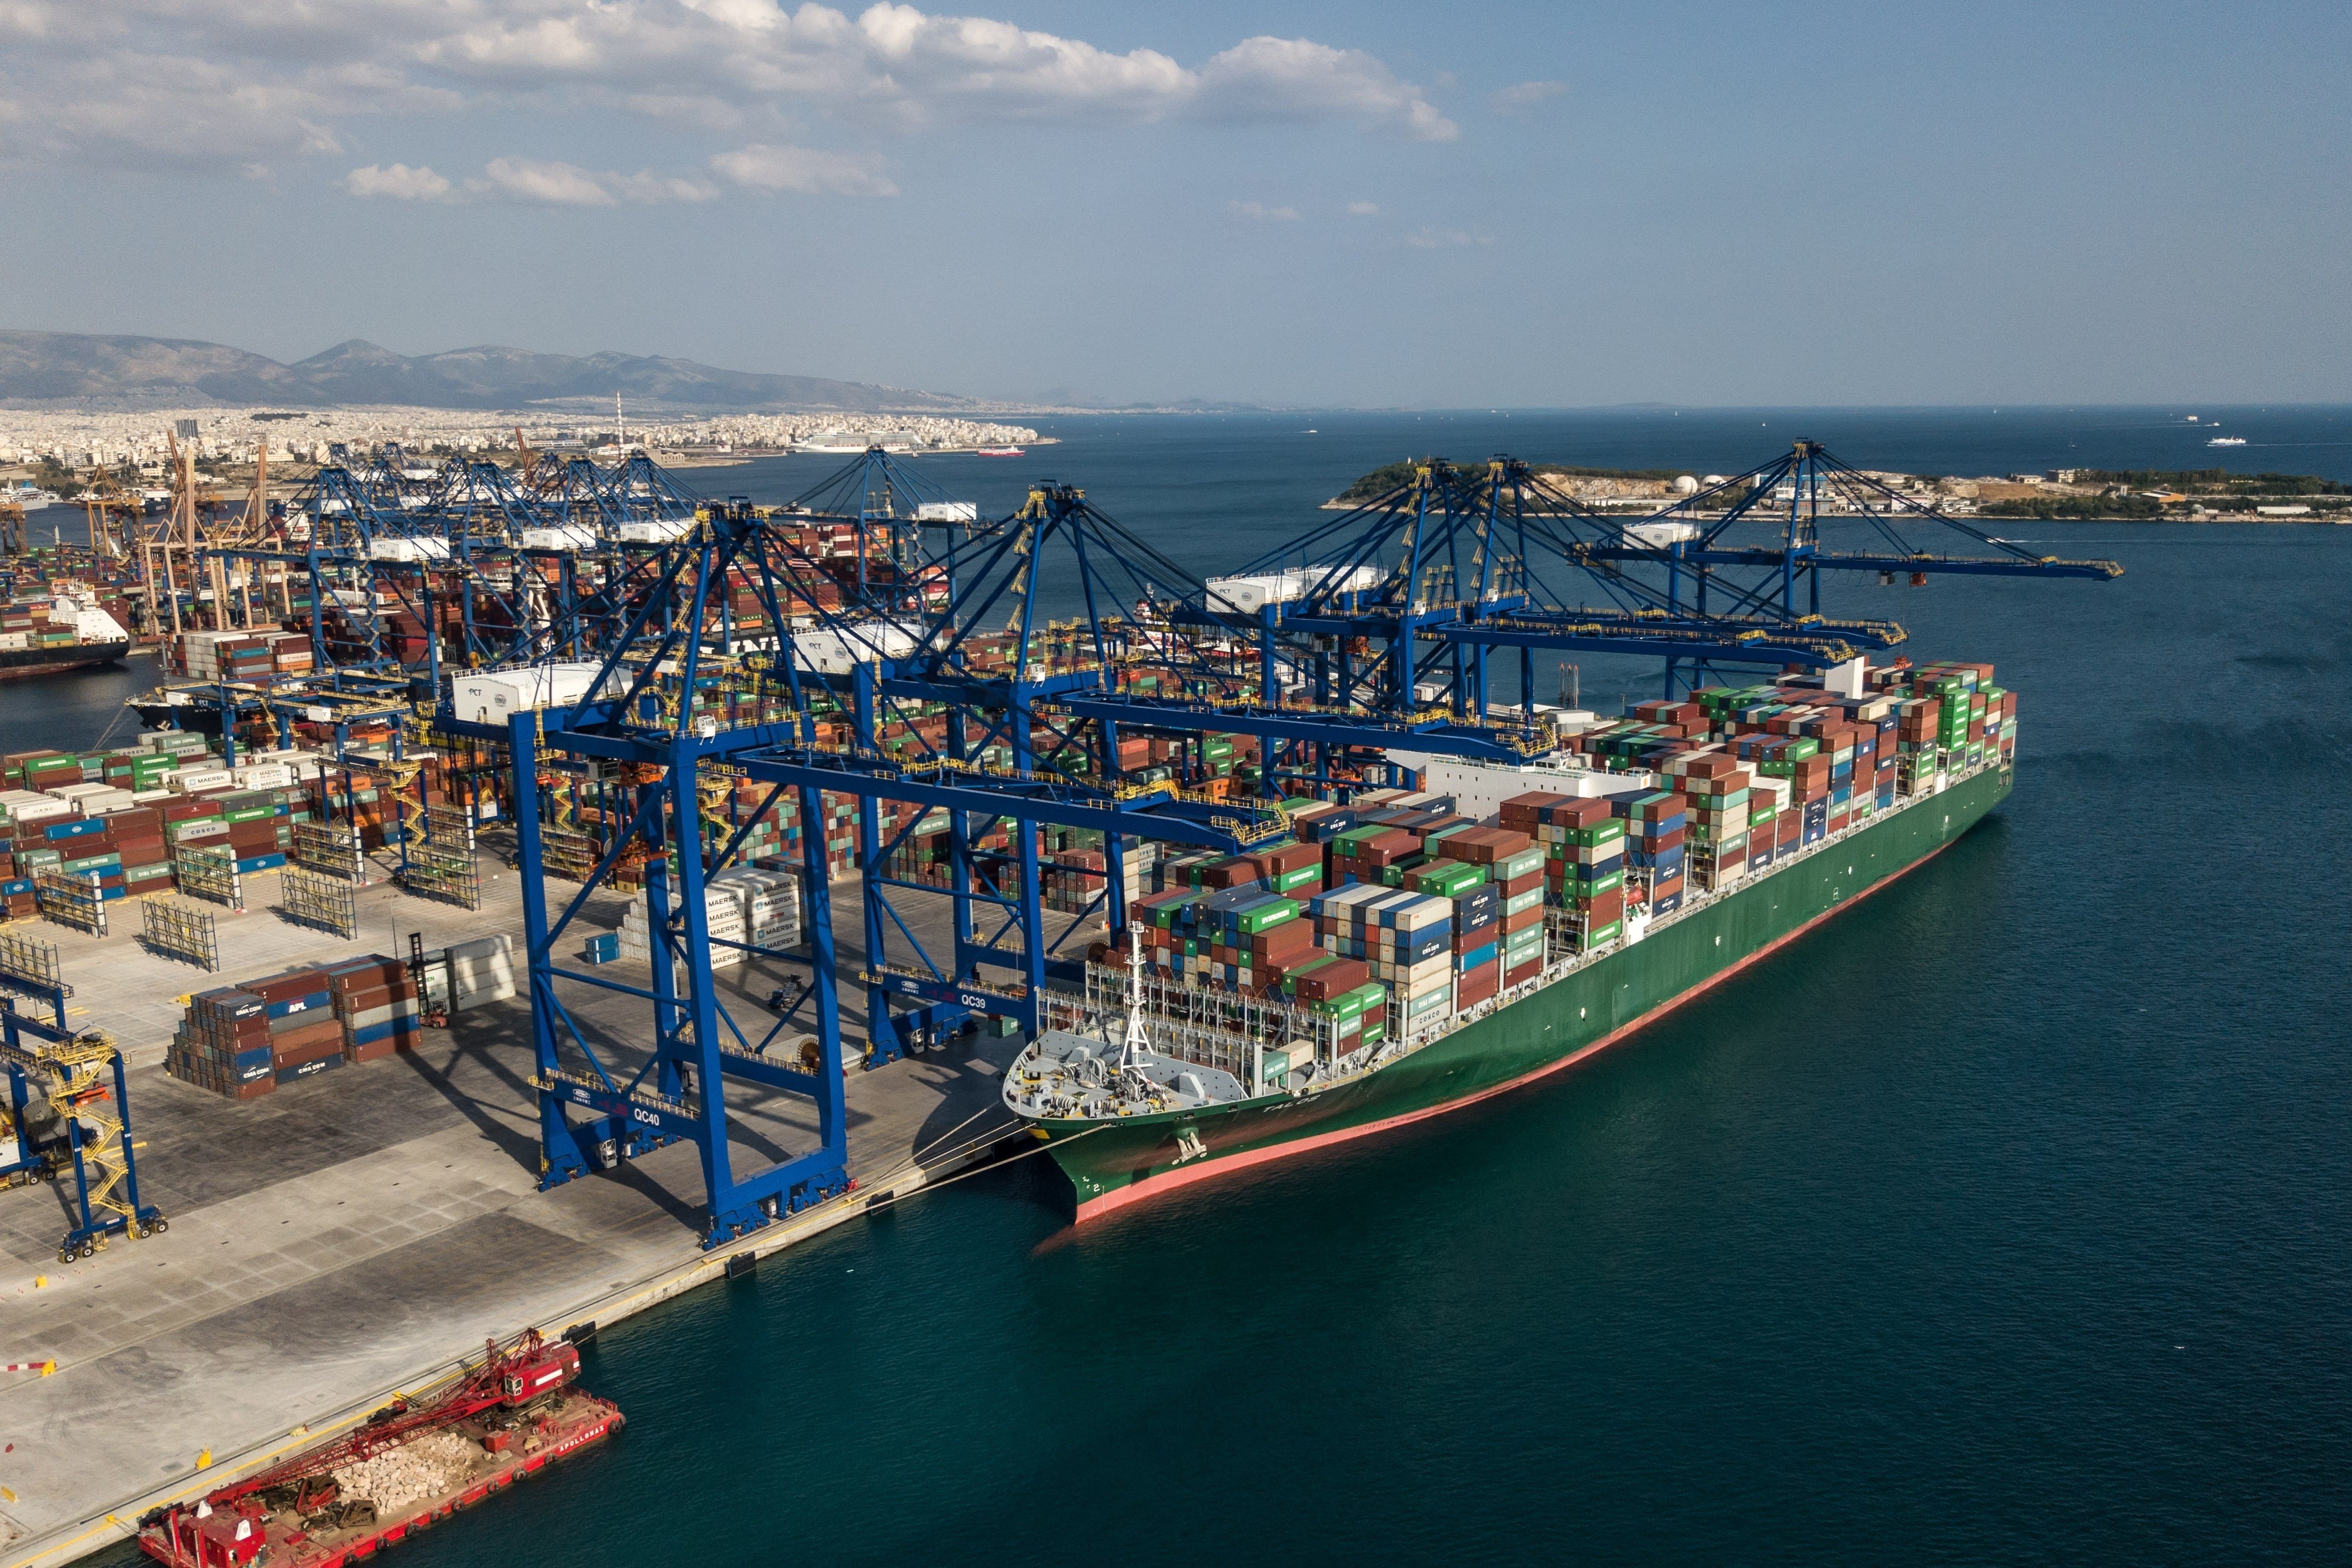 Beijing believes growing trade between China and Europe will transform the Port of Piraeus in Greece. Photo: Xinhua